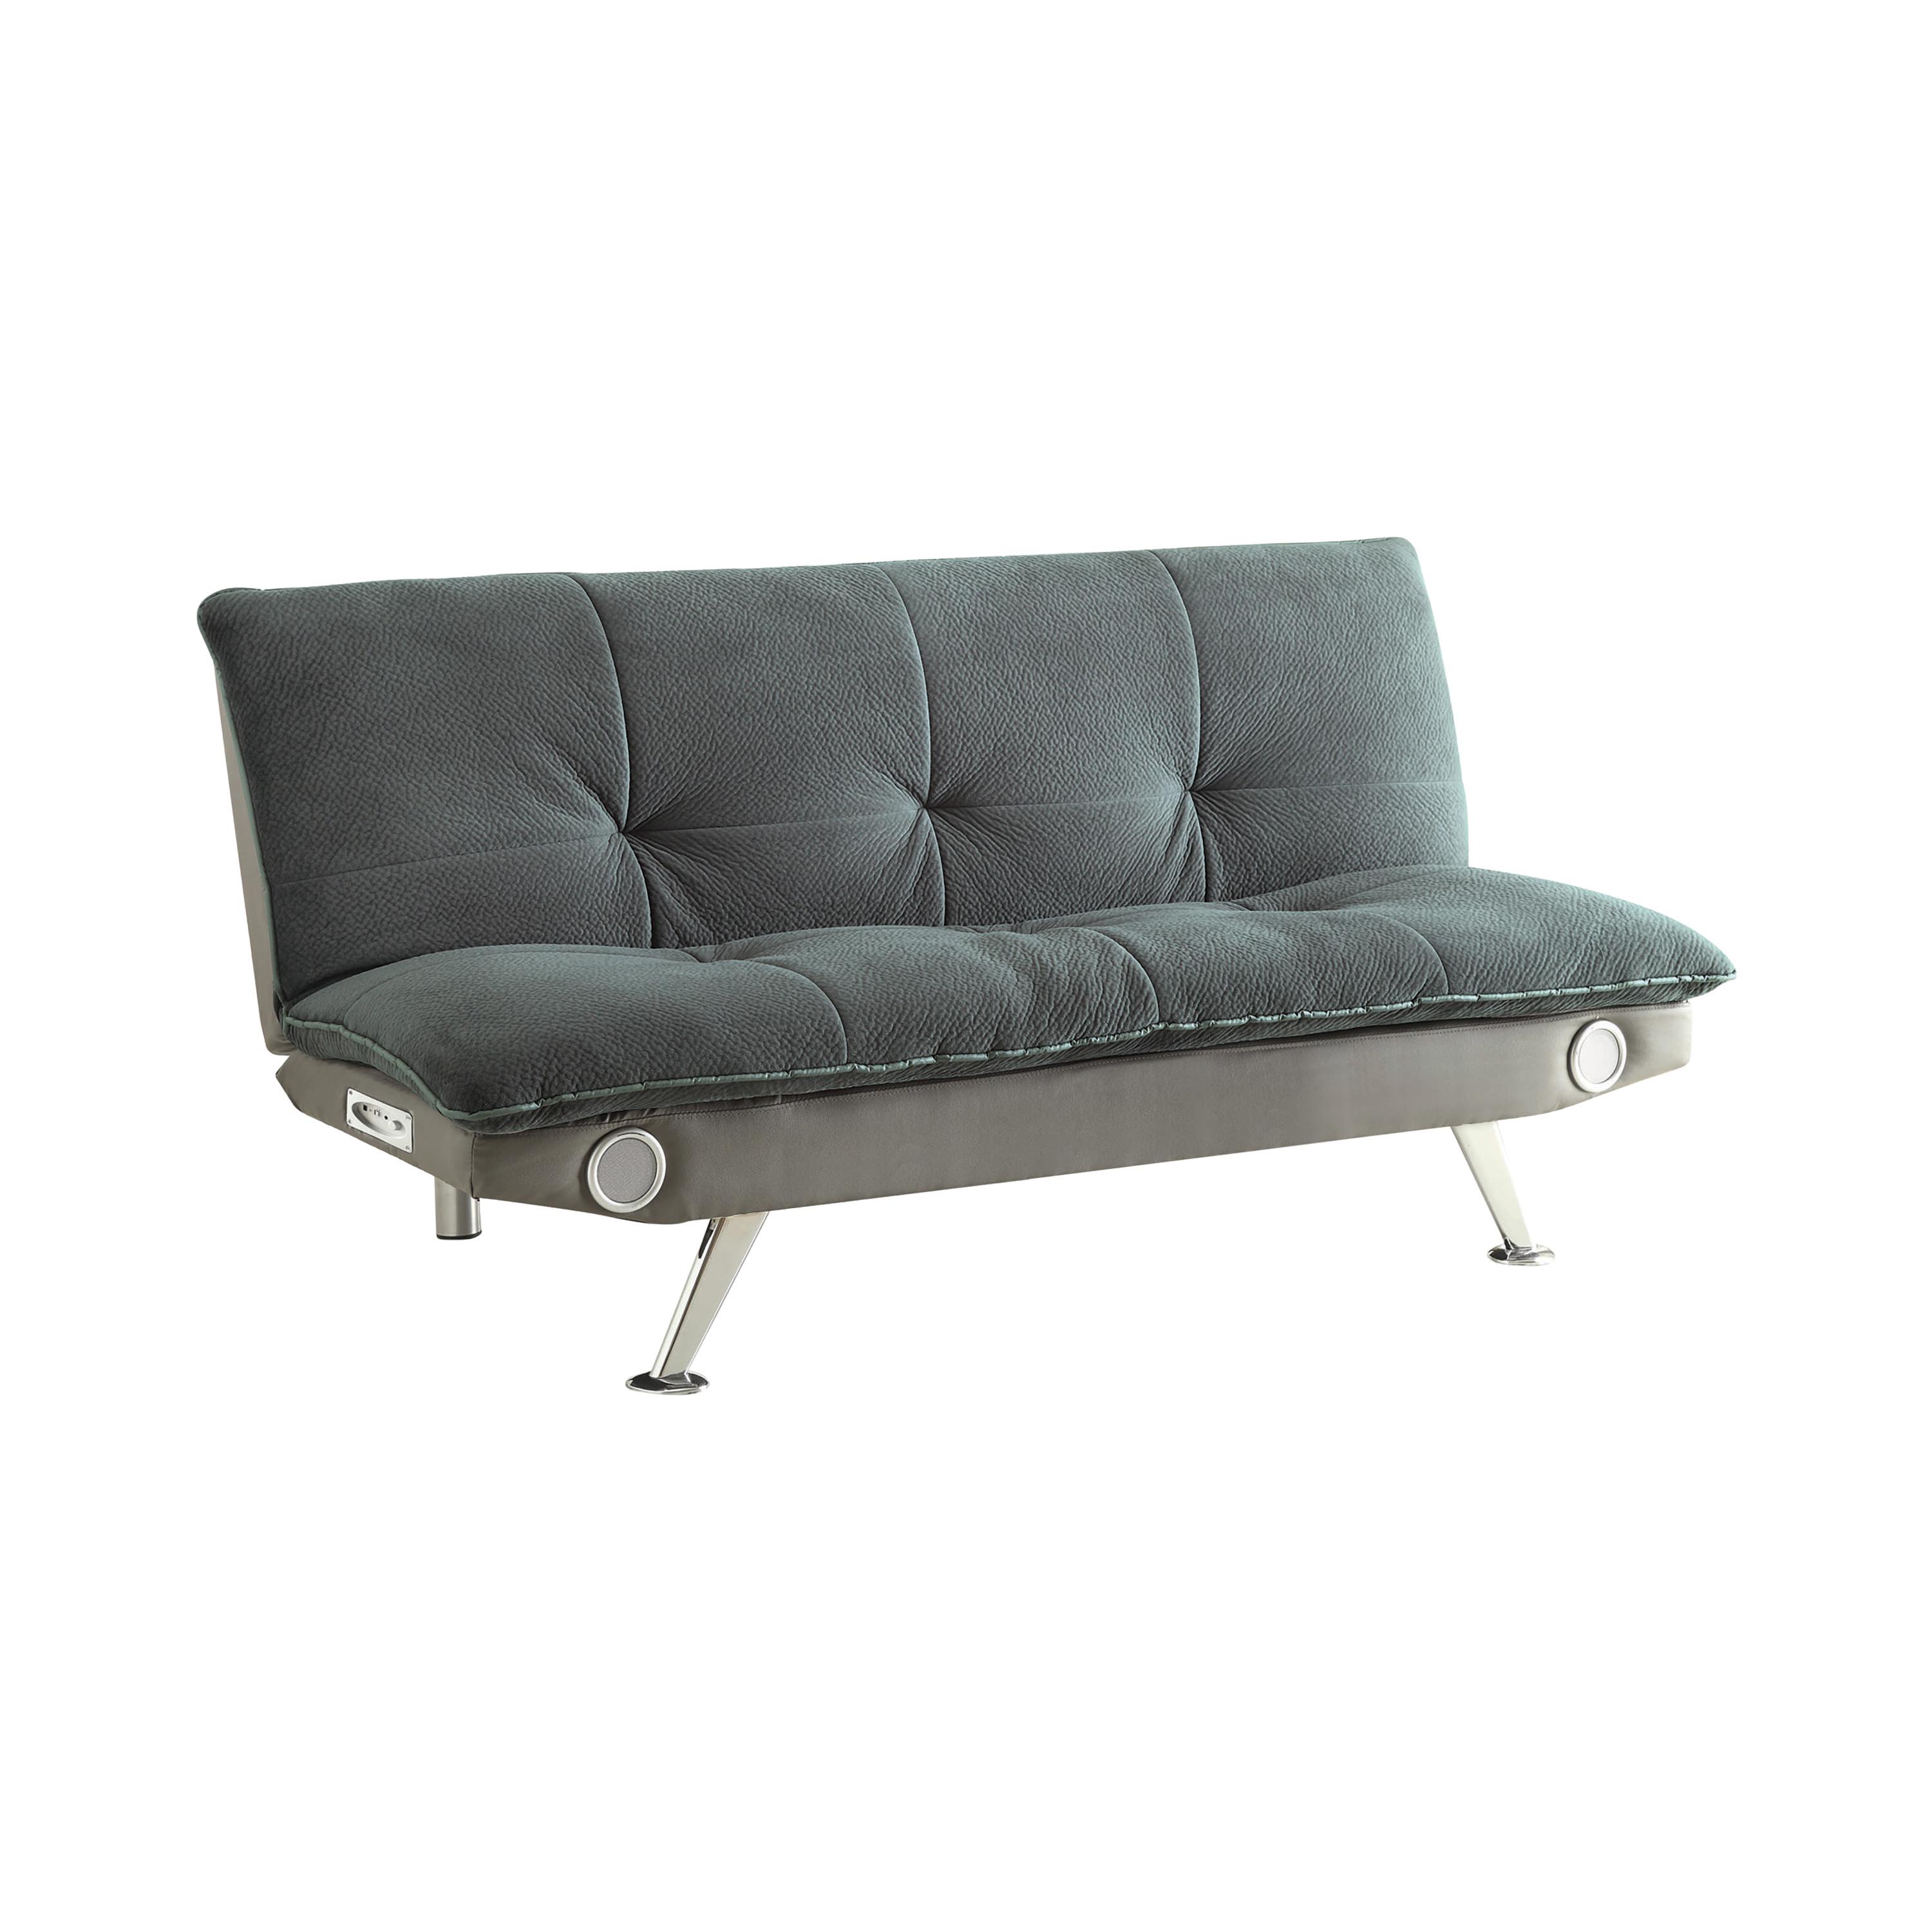 Contemporary Sofa bed 500046 Odel 500046 in Gray Leatherette